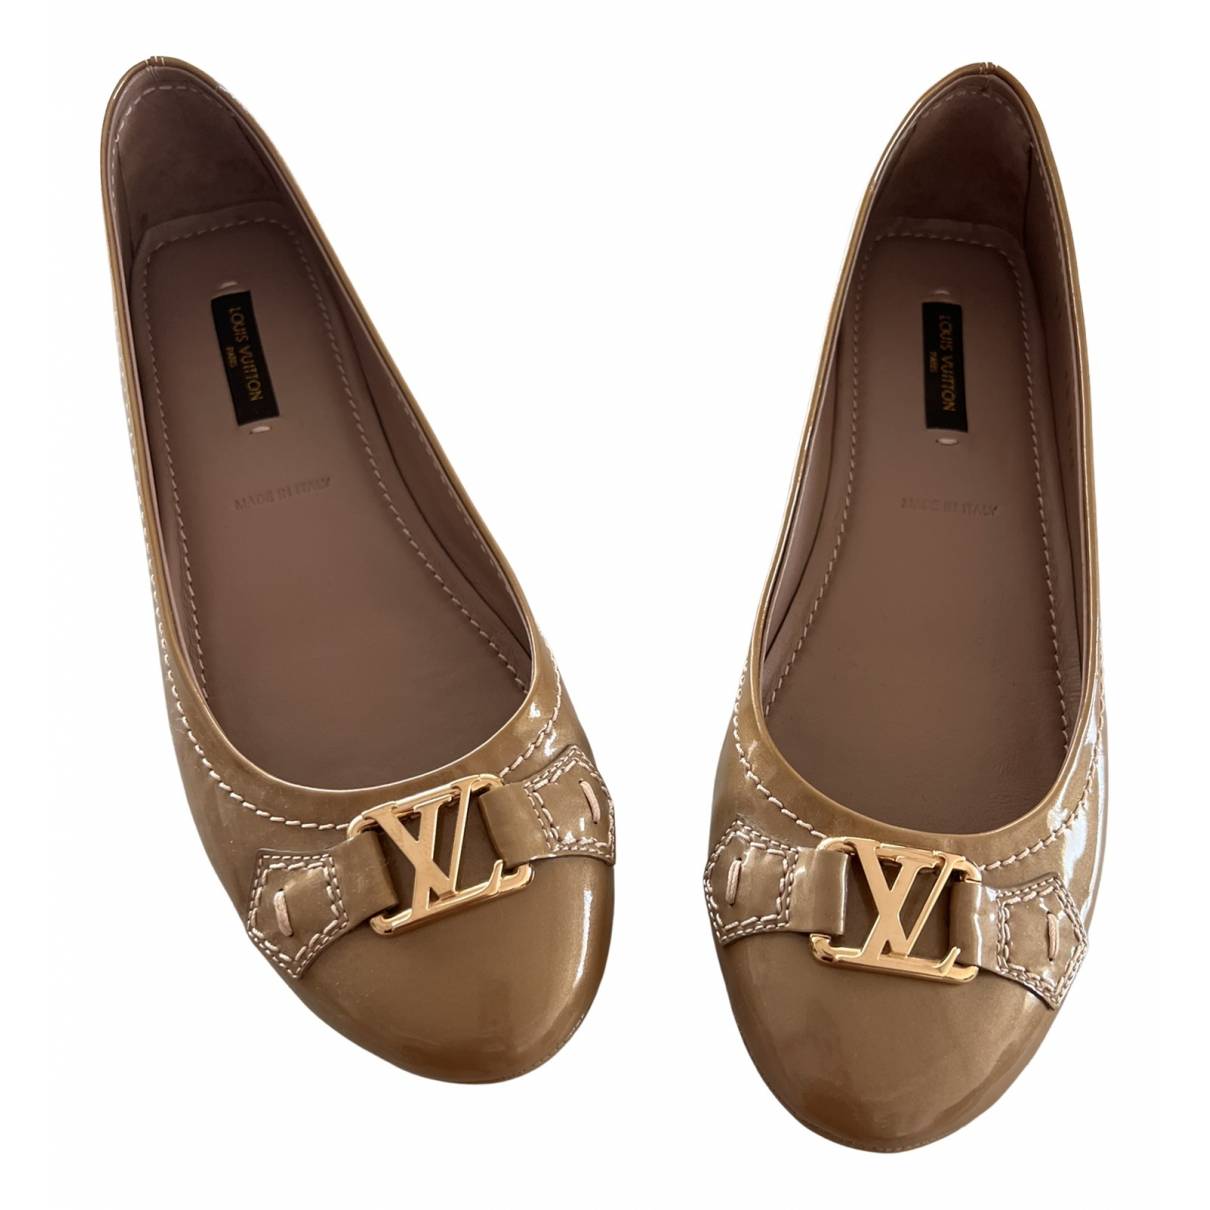 Dreamy rose leather ballet flats Louis Vuitton Beige size 37 EU in Leather  - 26351678